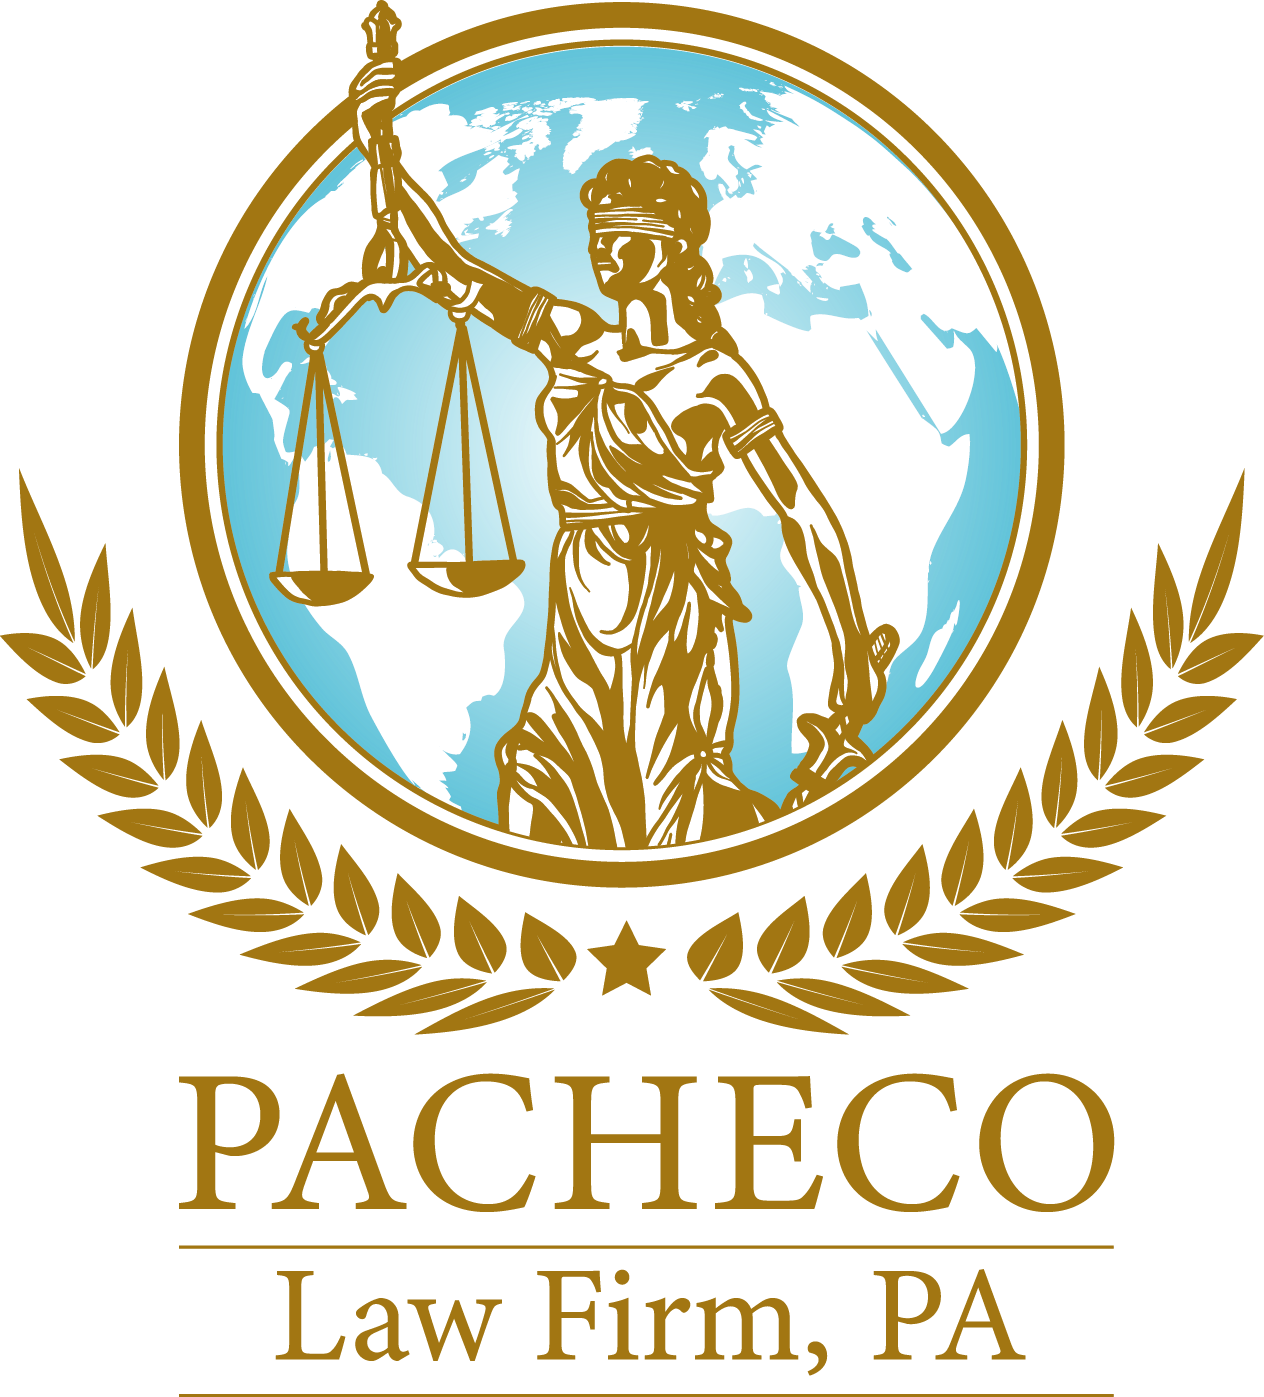 Pacheco Law Firm, PA 